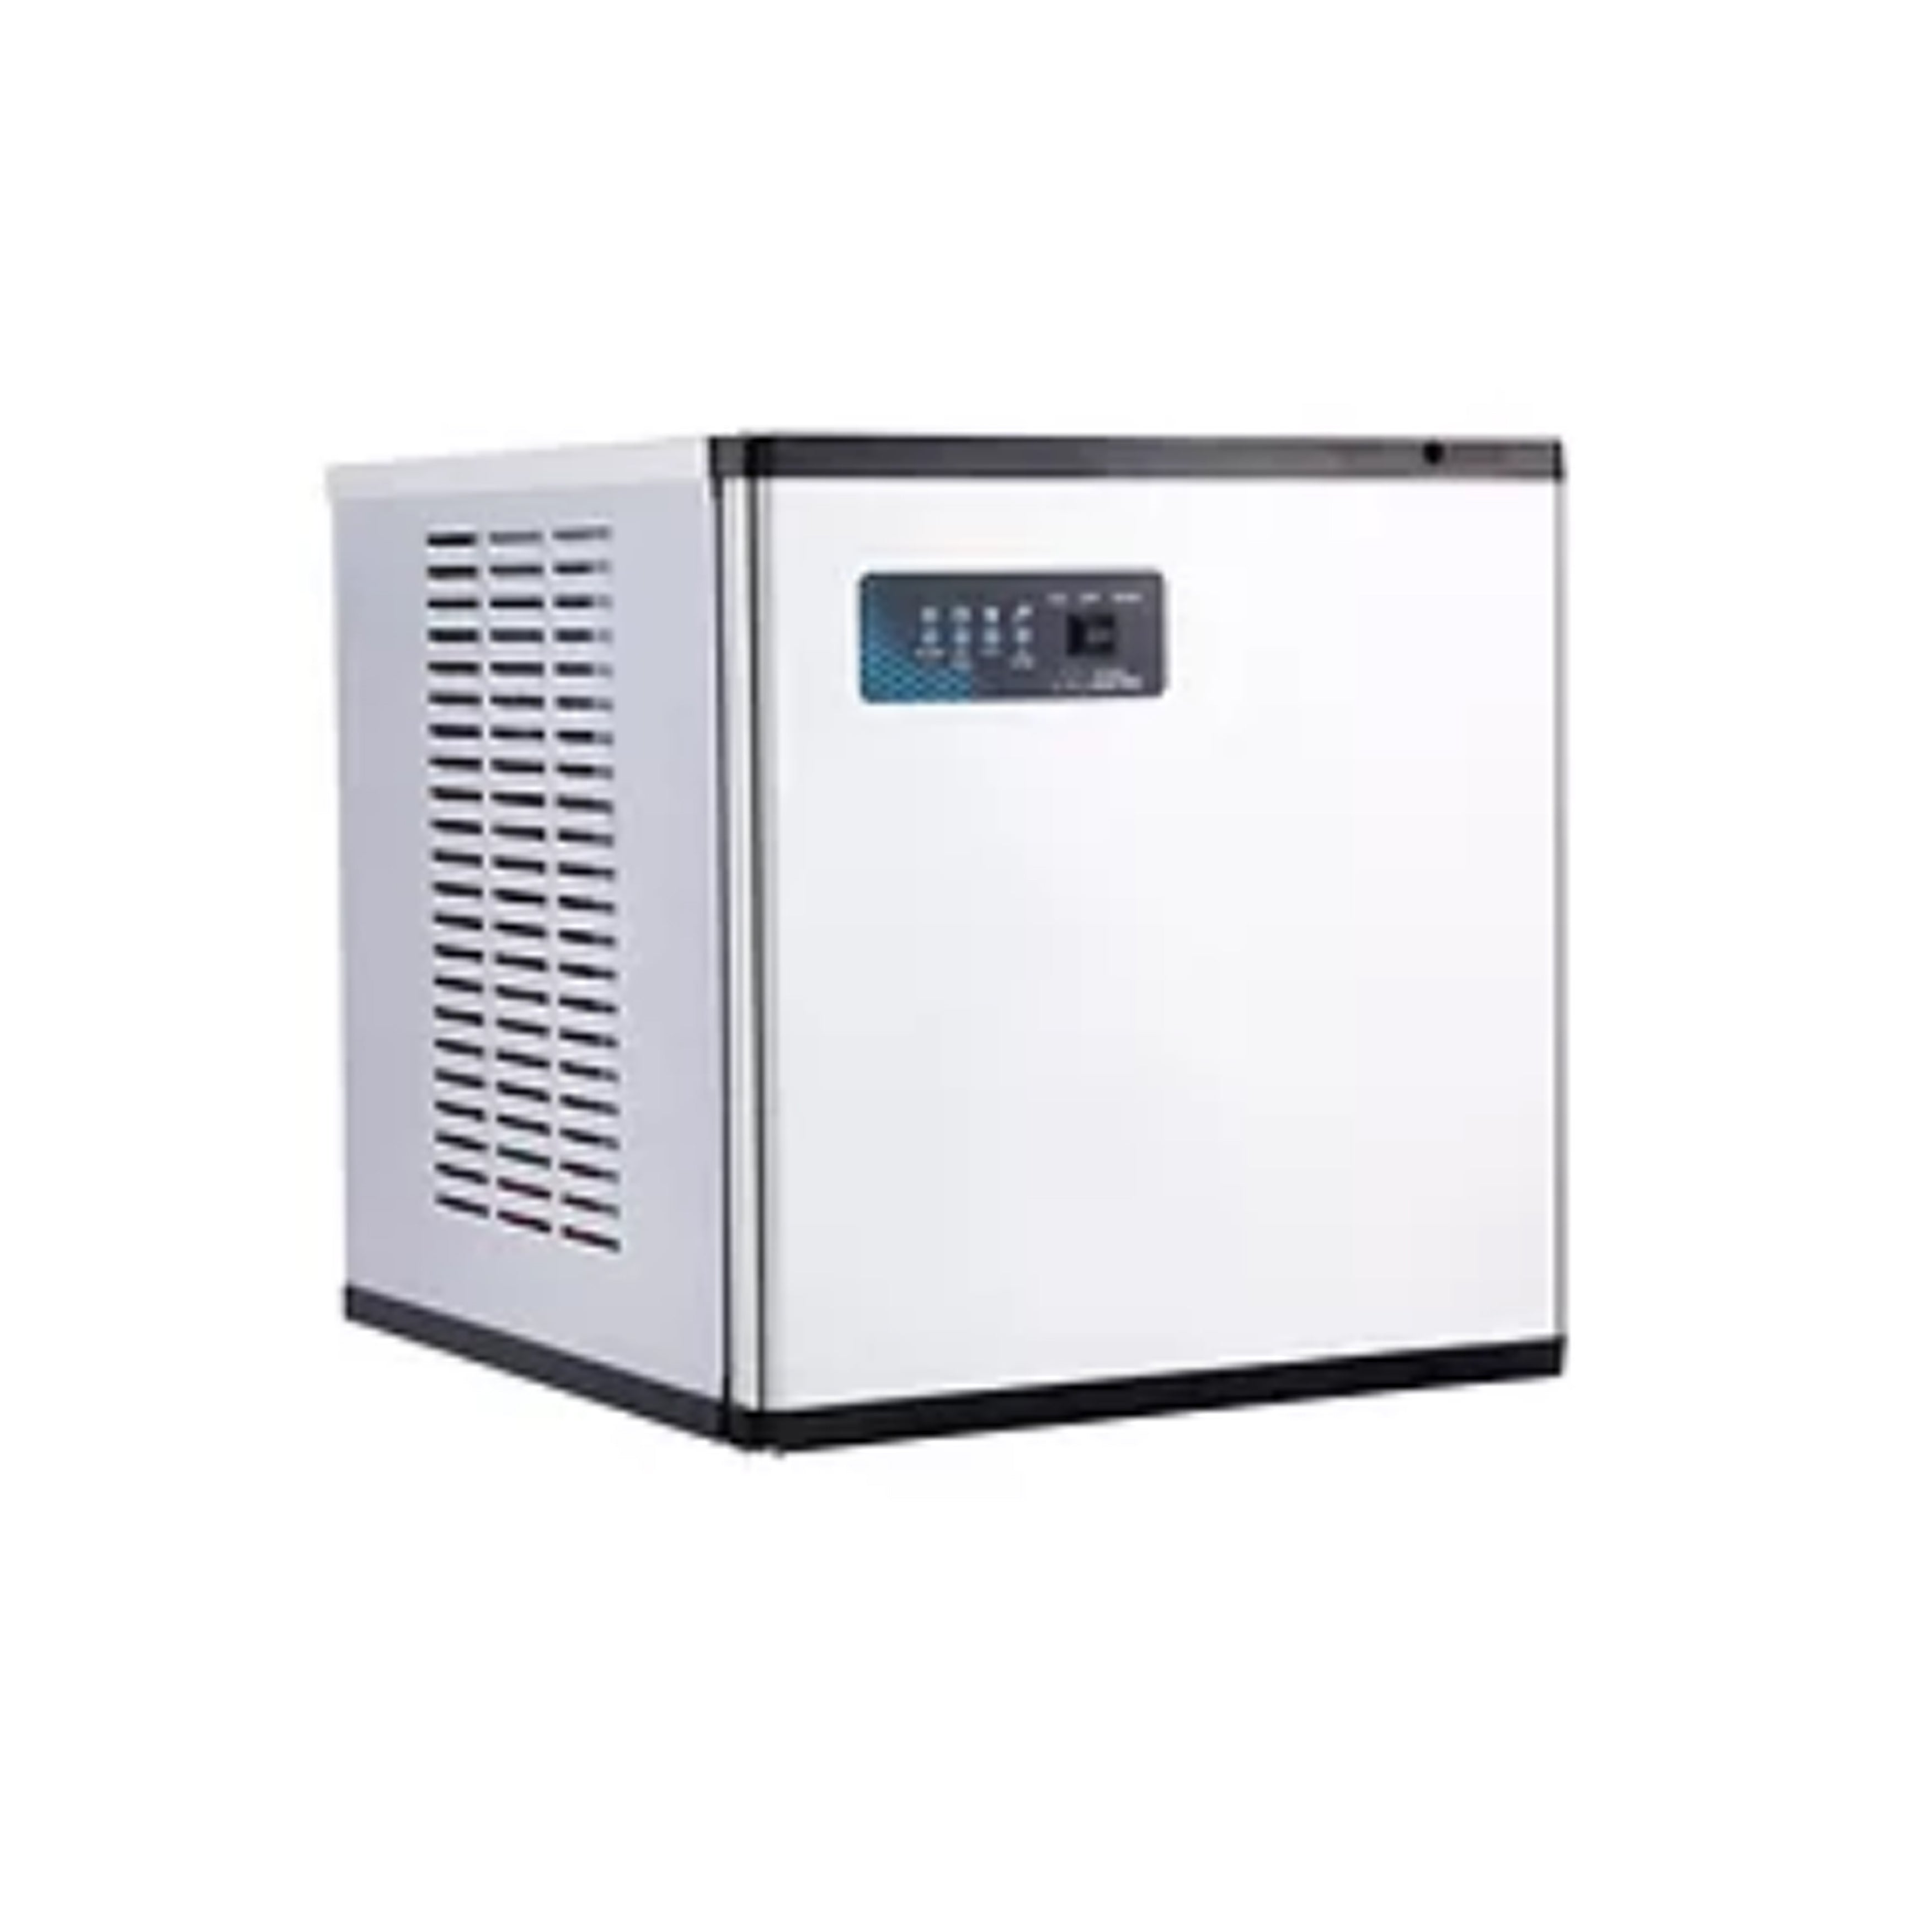 Icetro - IM-0350-AH-22, Commercial 394lbs Modular Air Cooled Ice Machine Half Ice Cube Maker